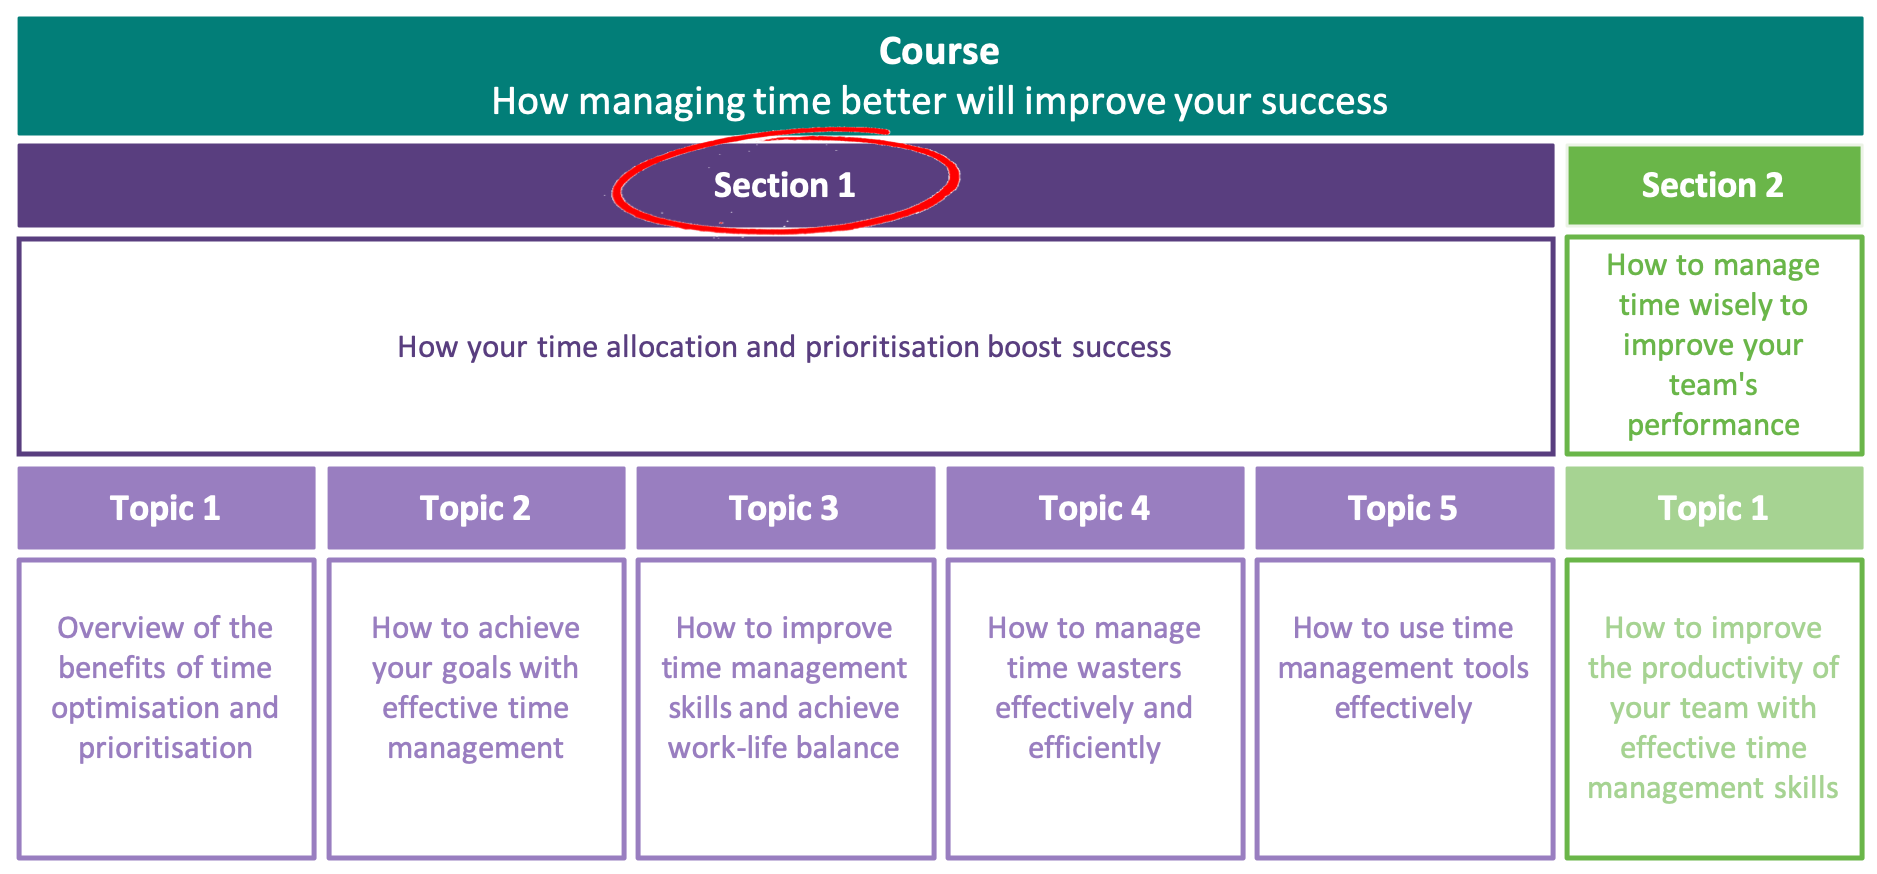 How your time allocation and prioritisation boost success